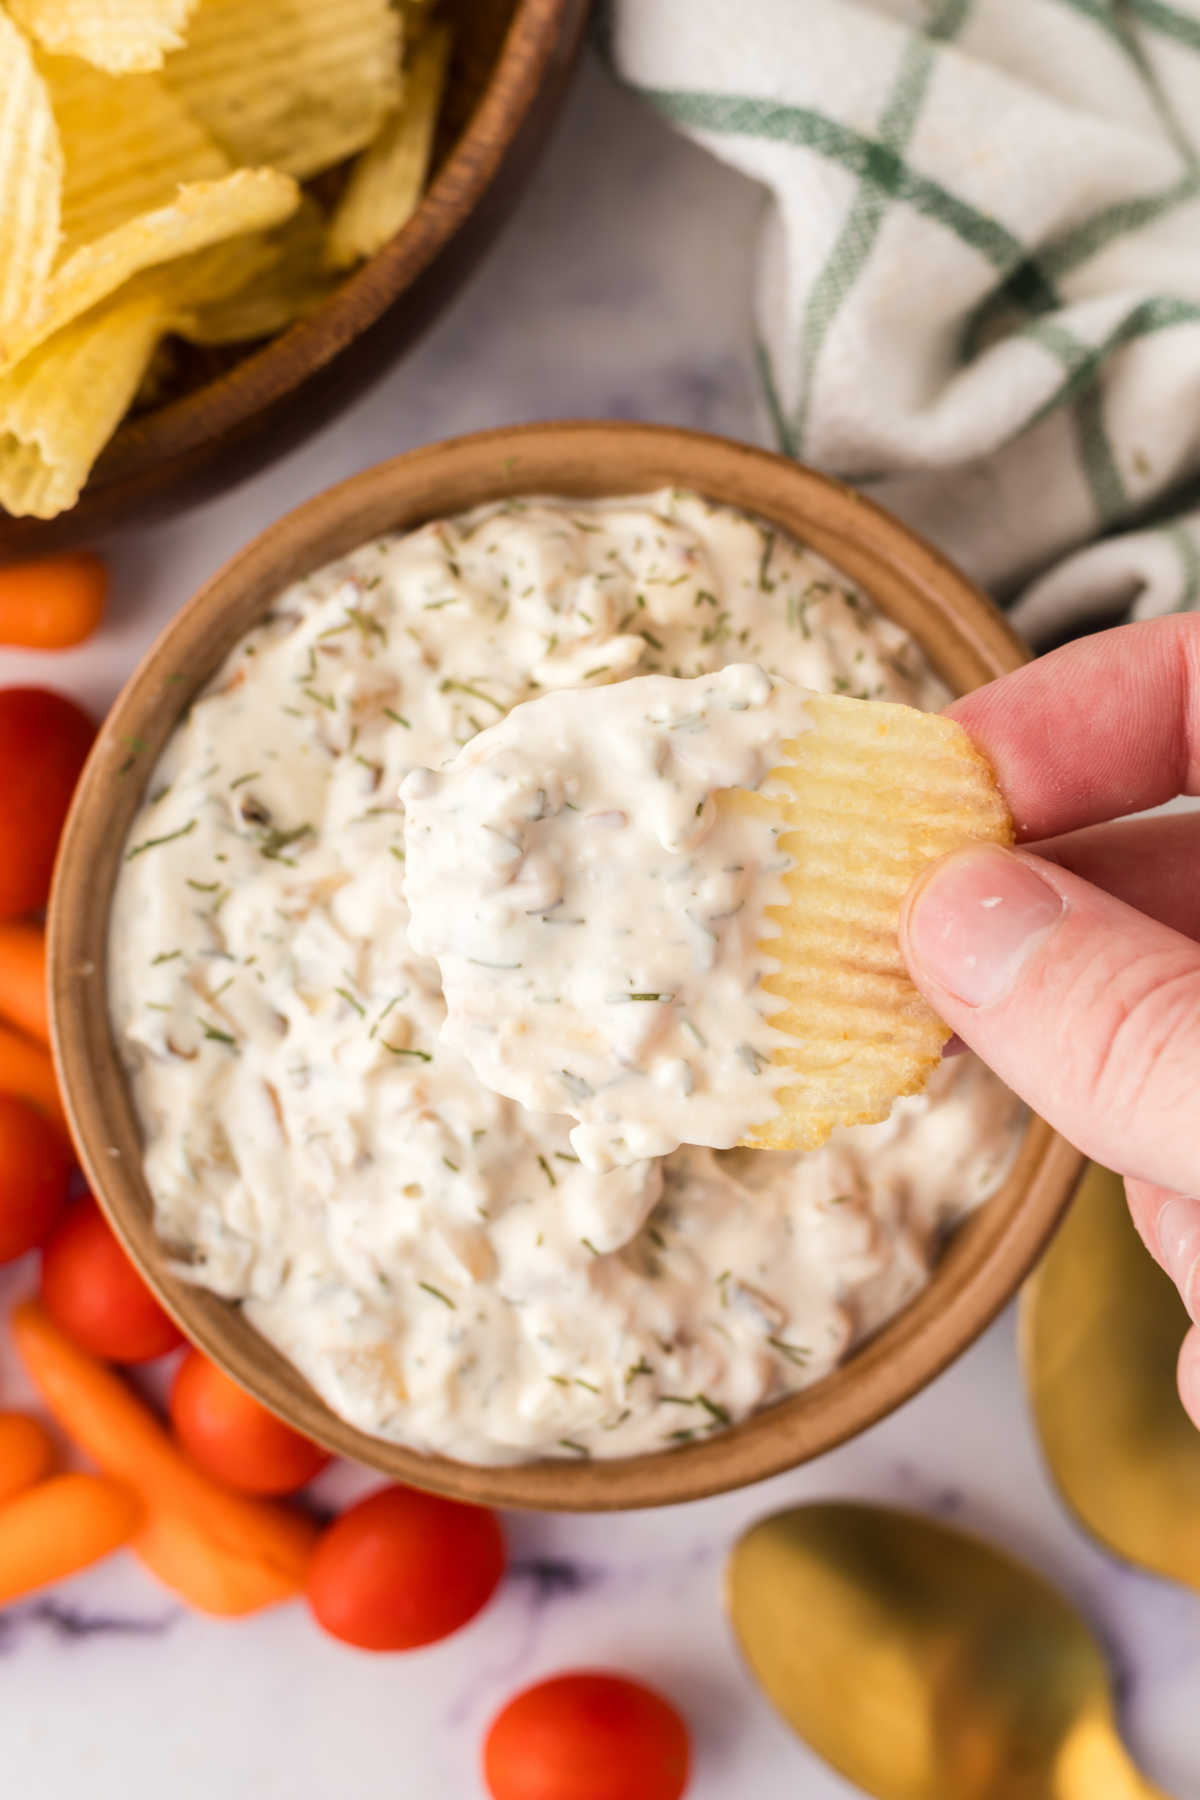 Hand holding ruffled potato chip with creamy onion dip on it, ready to eat.